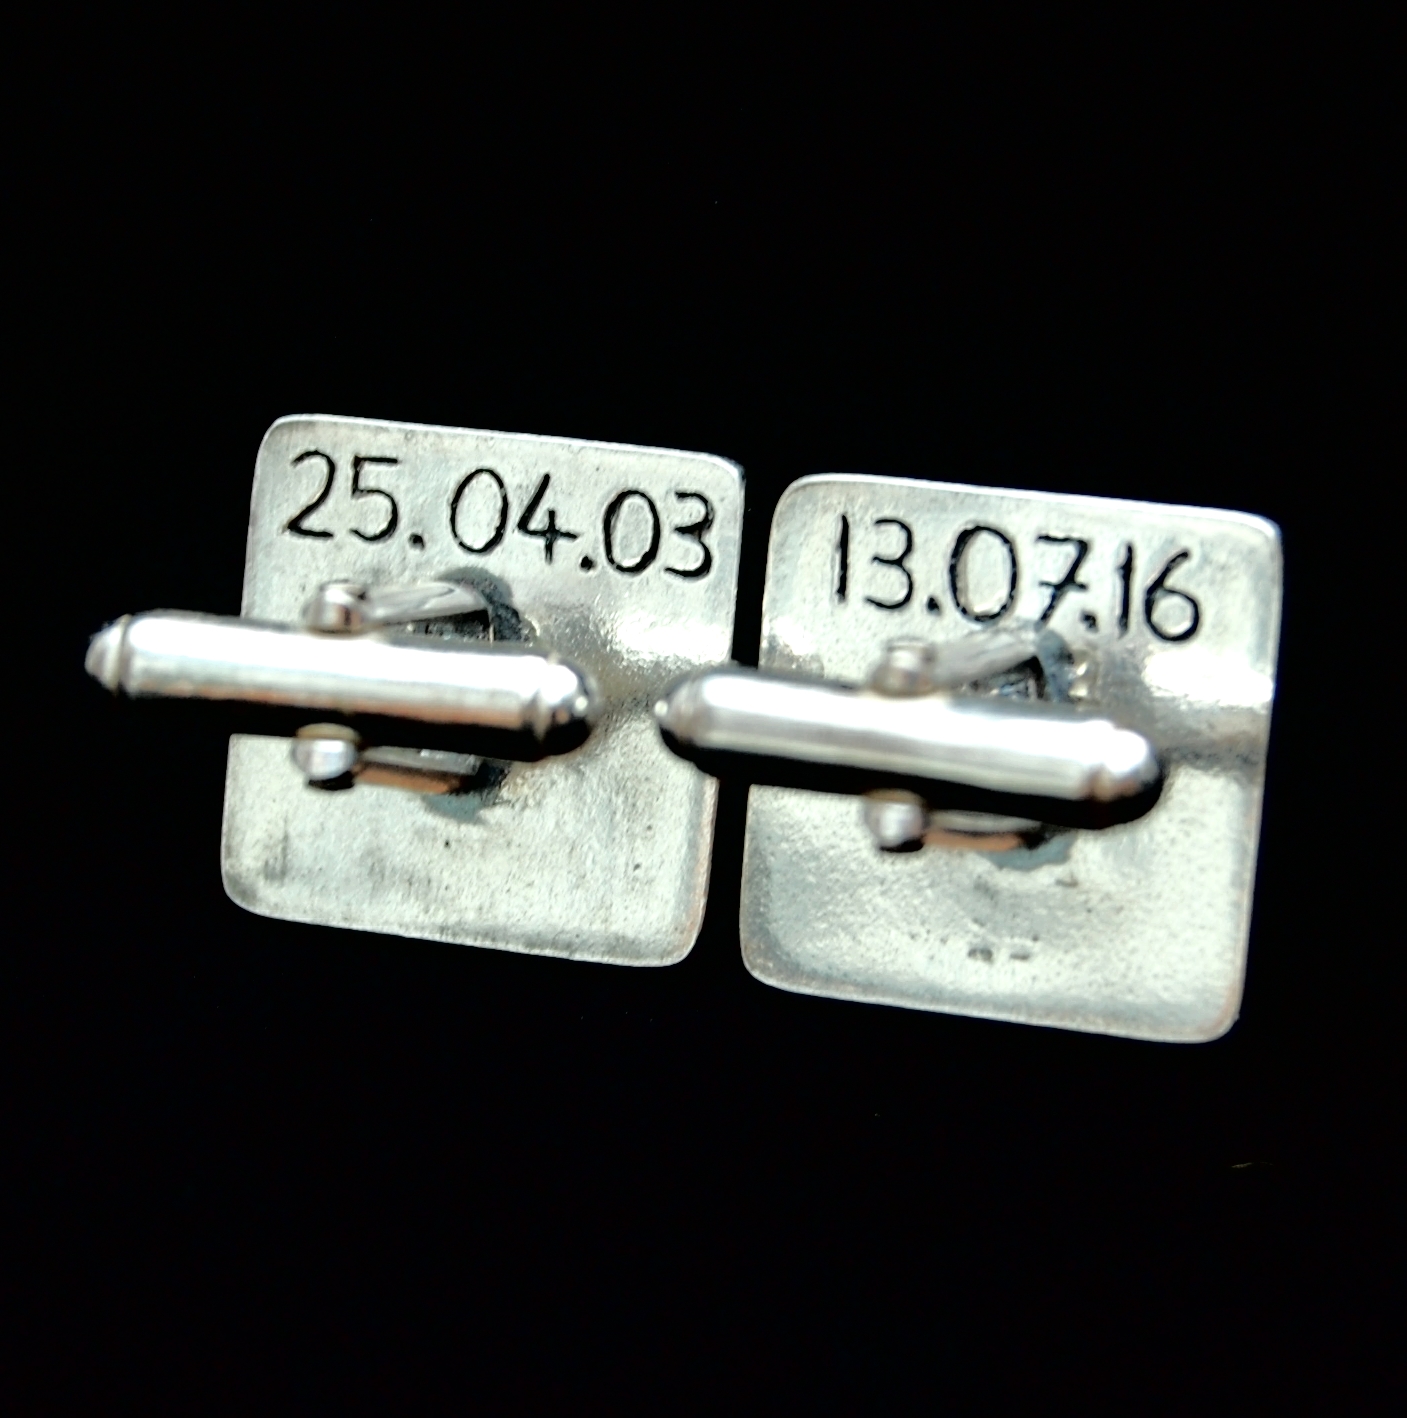 Dates inscribed on the back of square cufflinks.